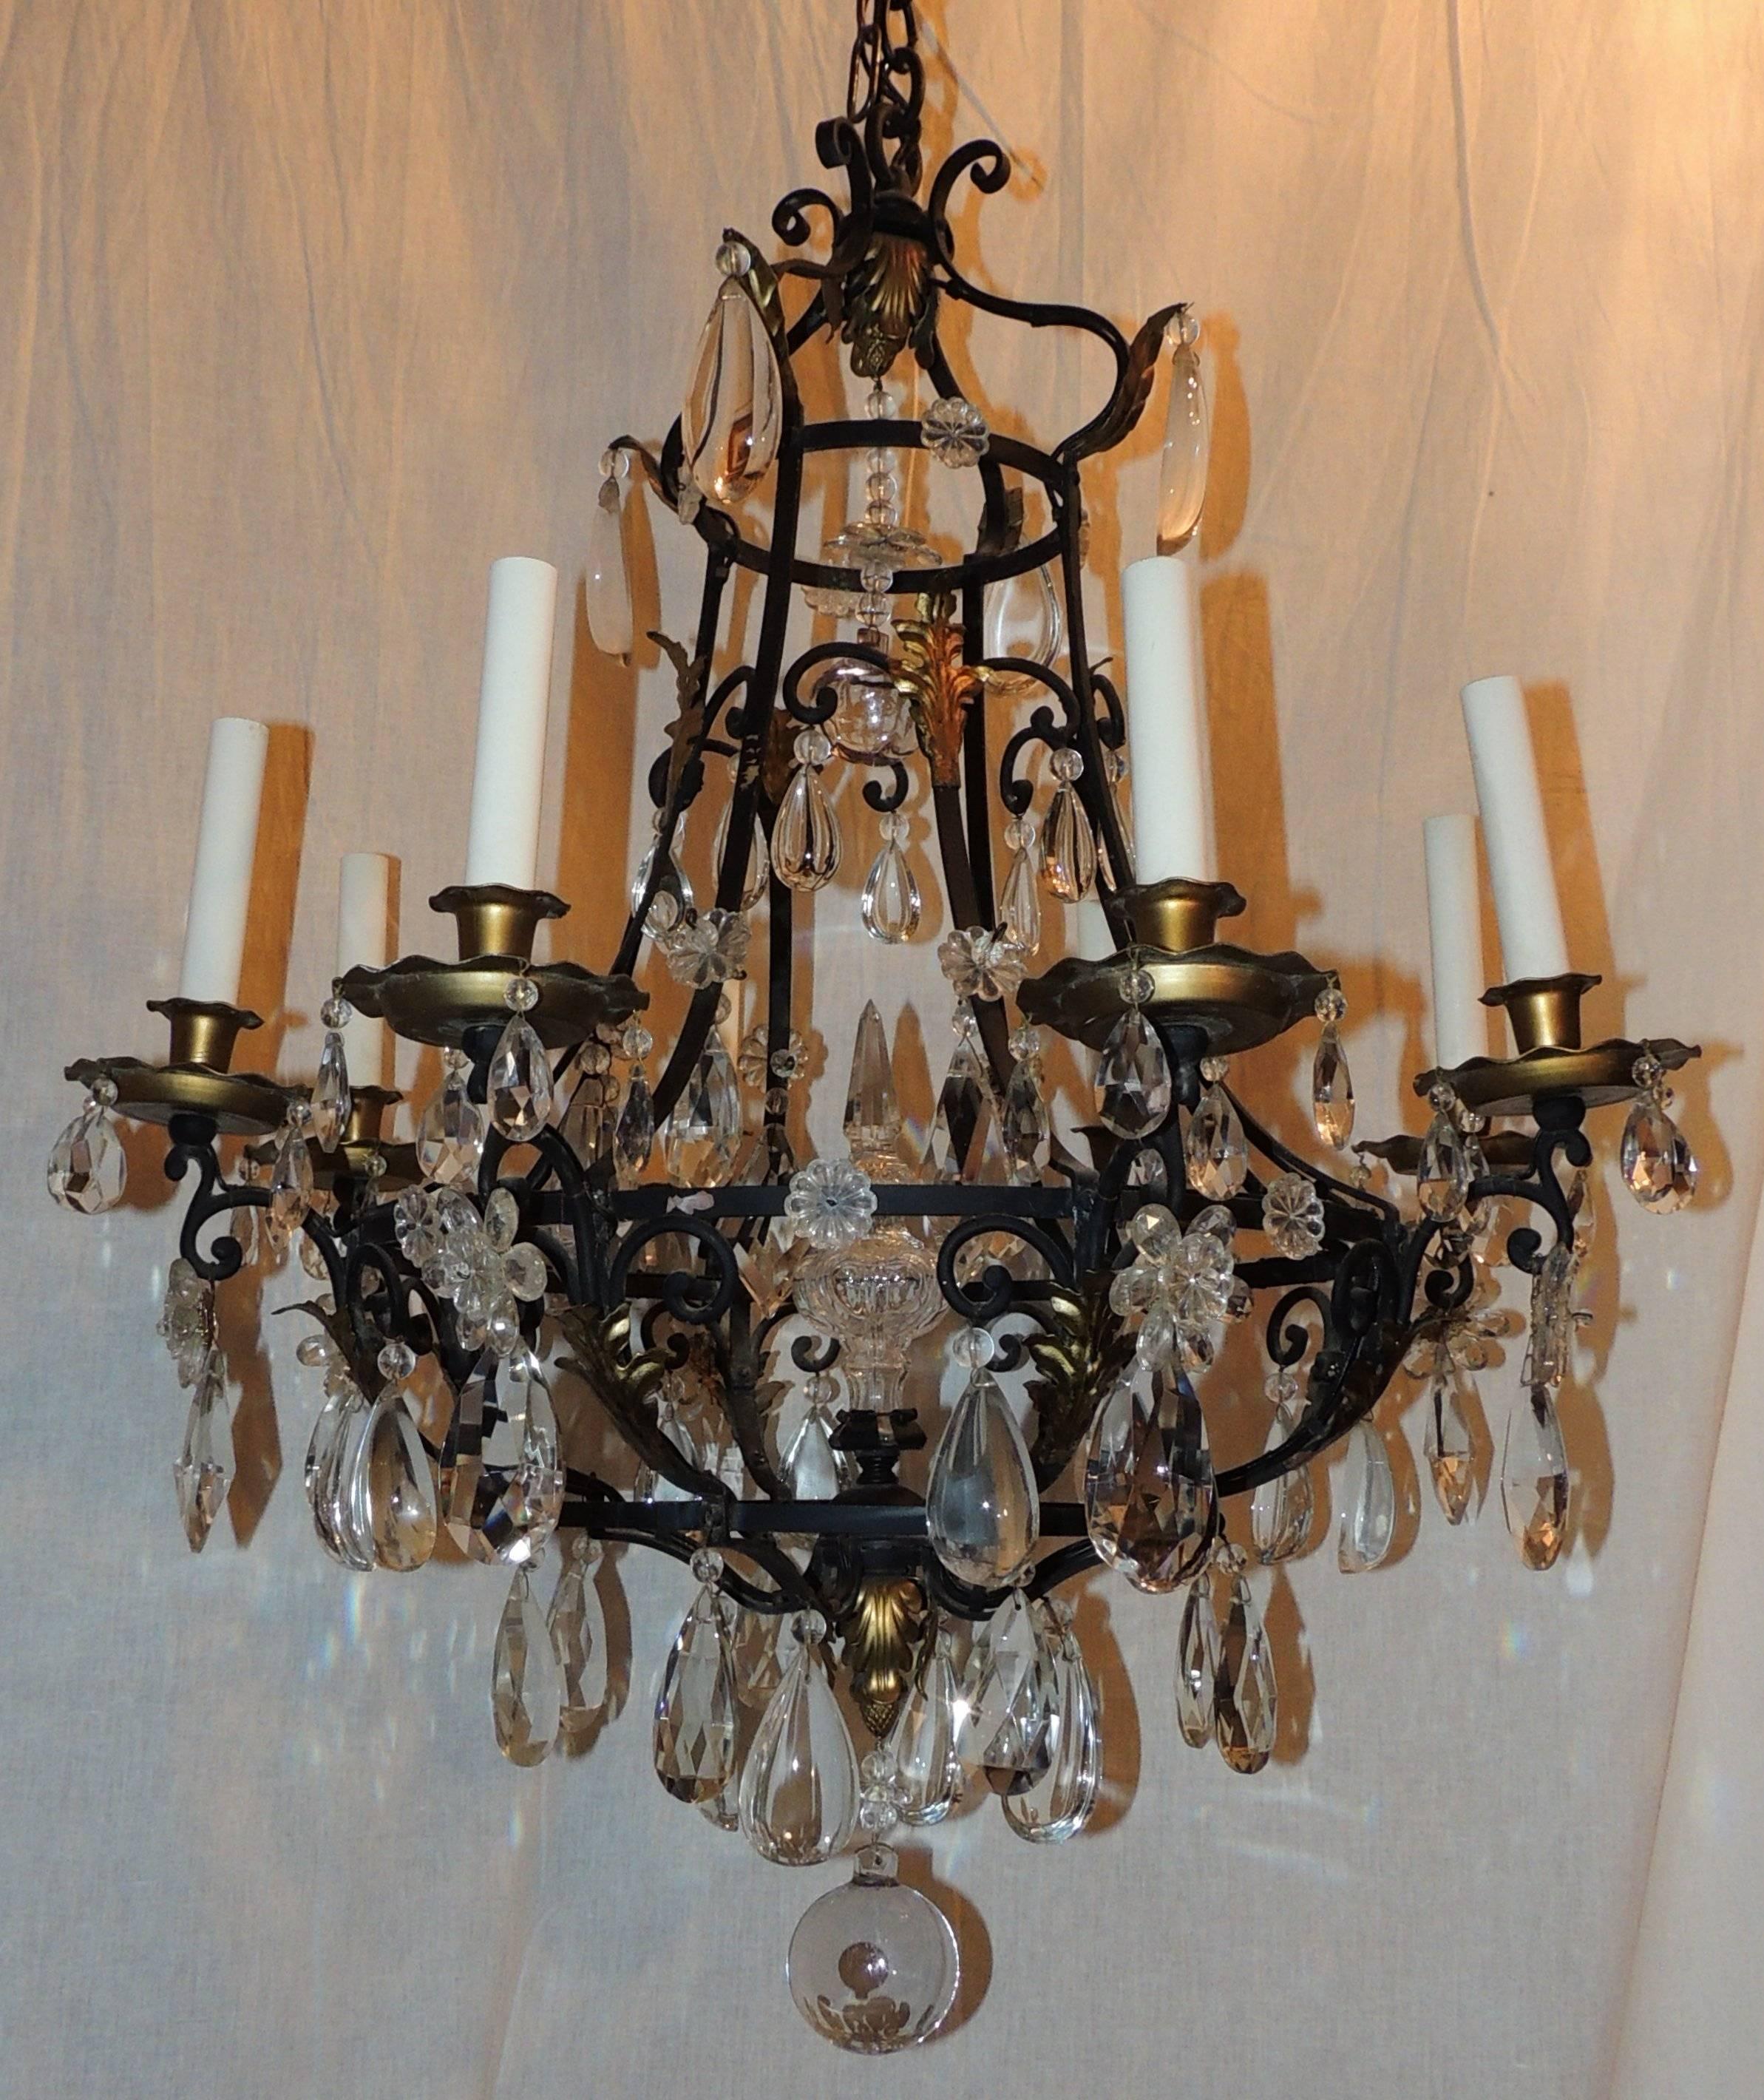 A Wonderful French wrought iron Gold gilt crystal obelisk Center chandelier With scroll Work  In The Manner Of Bagues.

Measures: 33